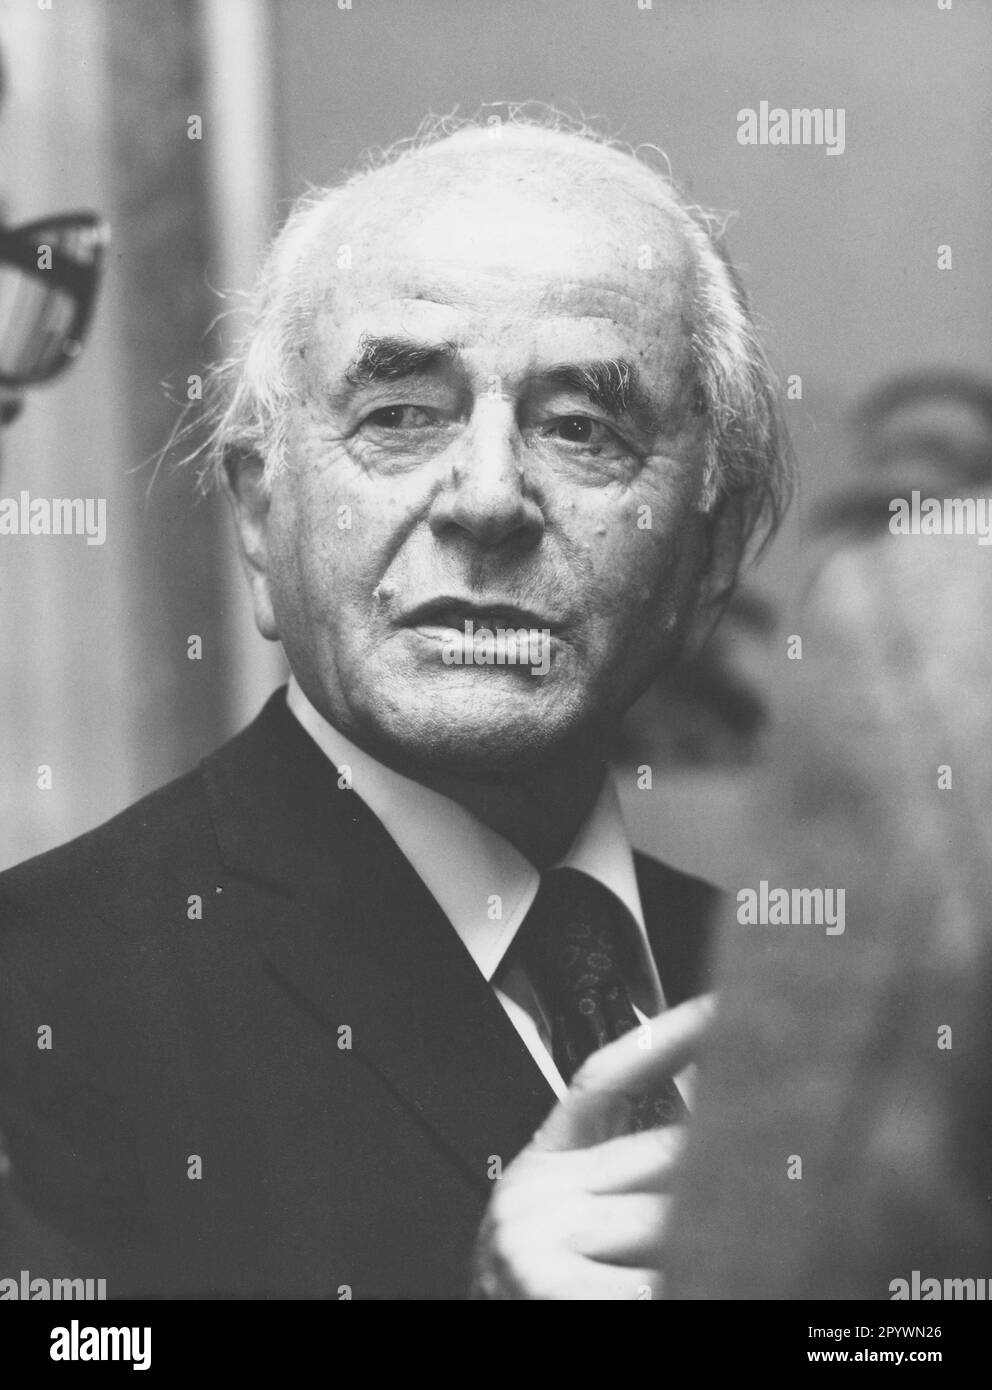 Albert Speer, architect and National Socialist politician, at the Frankfurt Book Fair [automated translation] Stock Photo